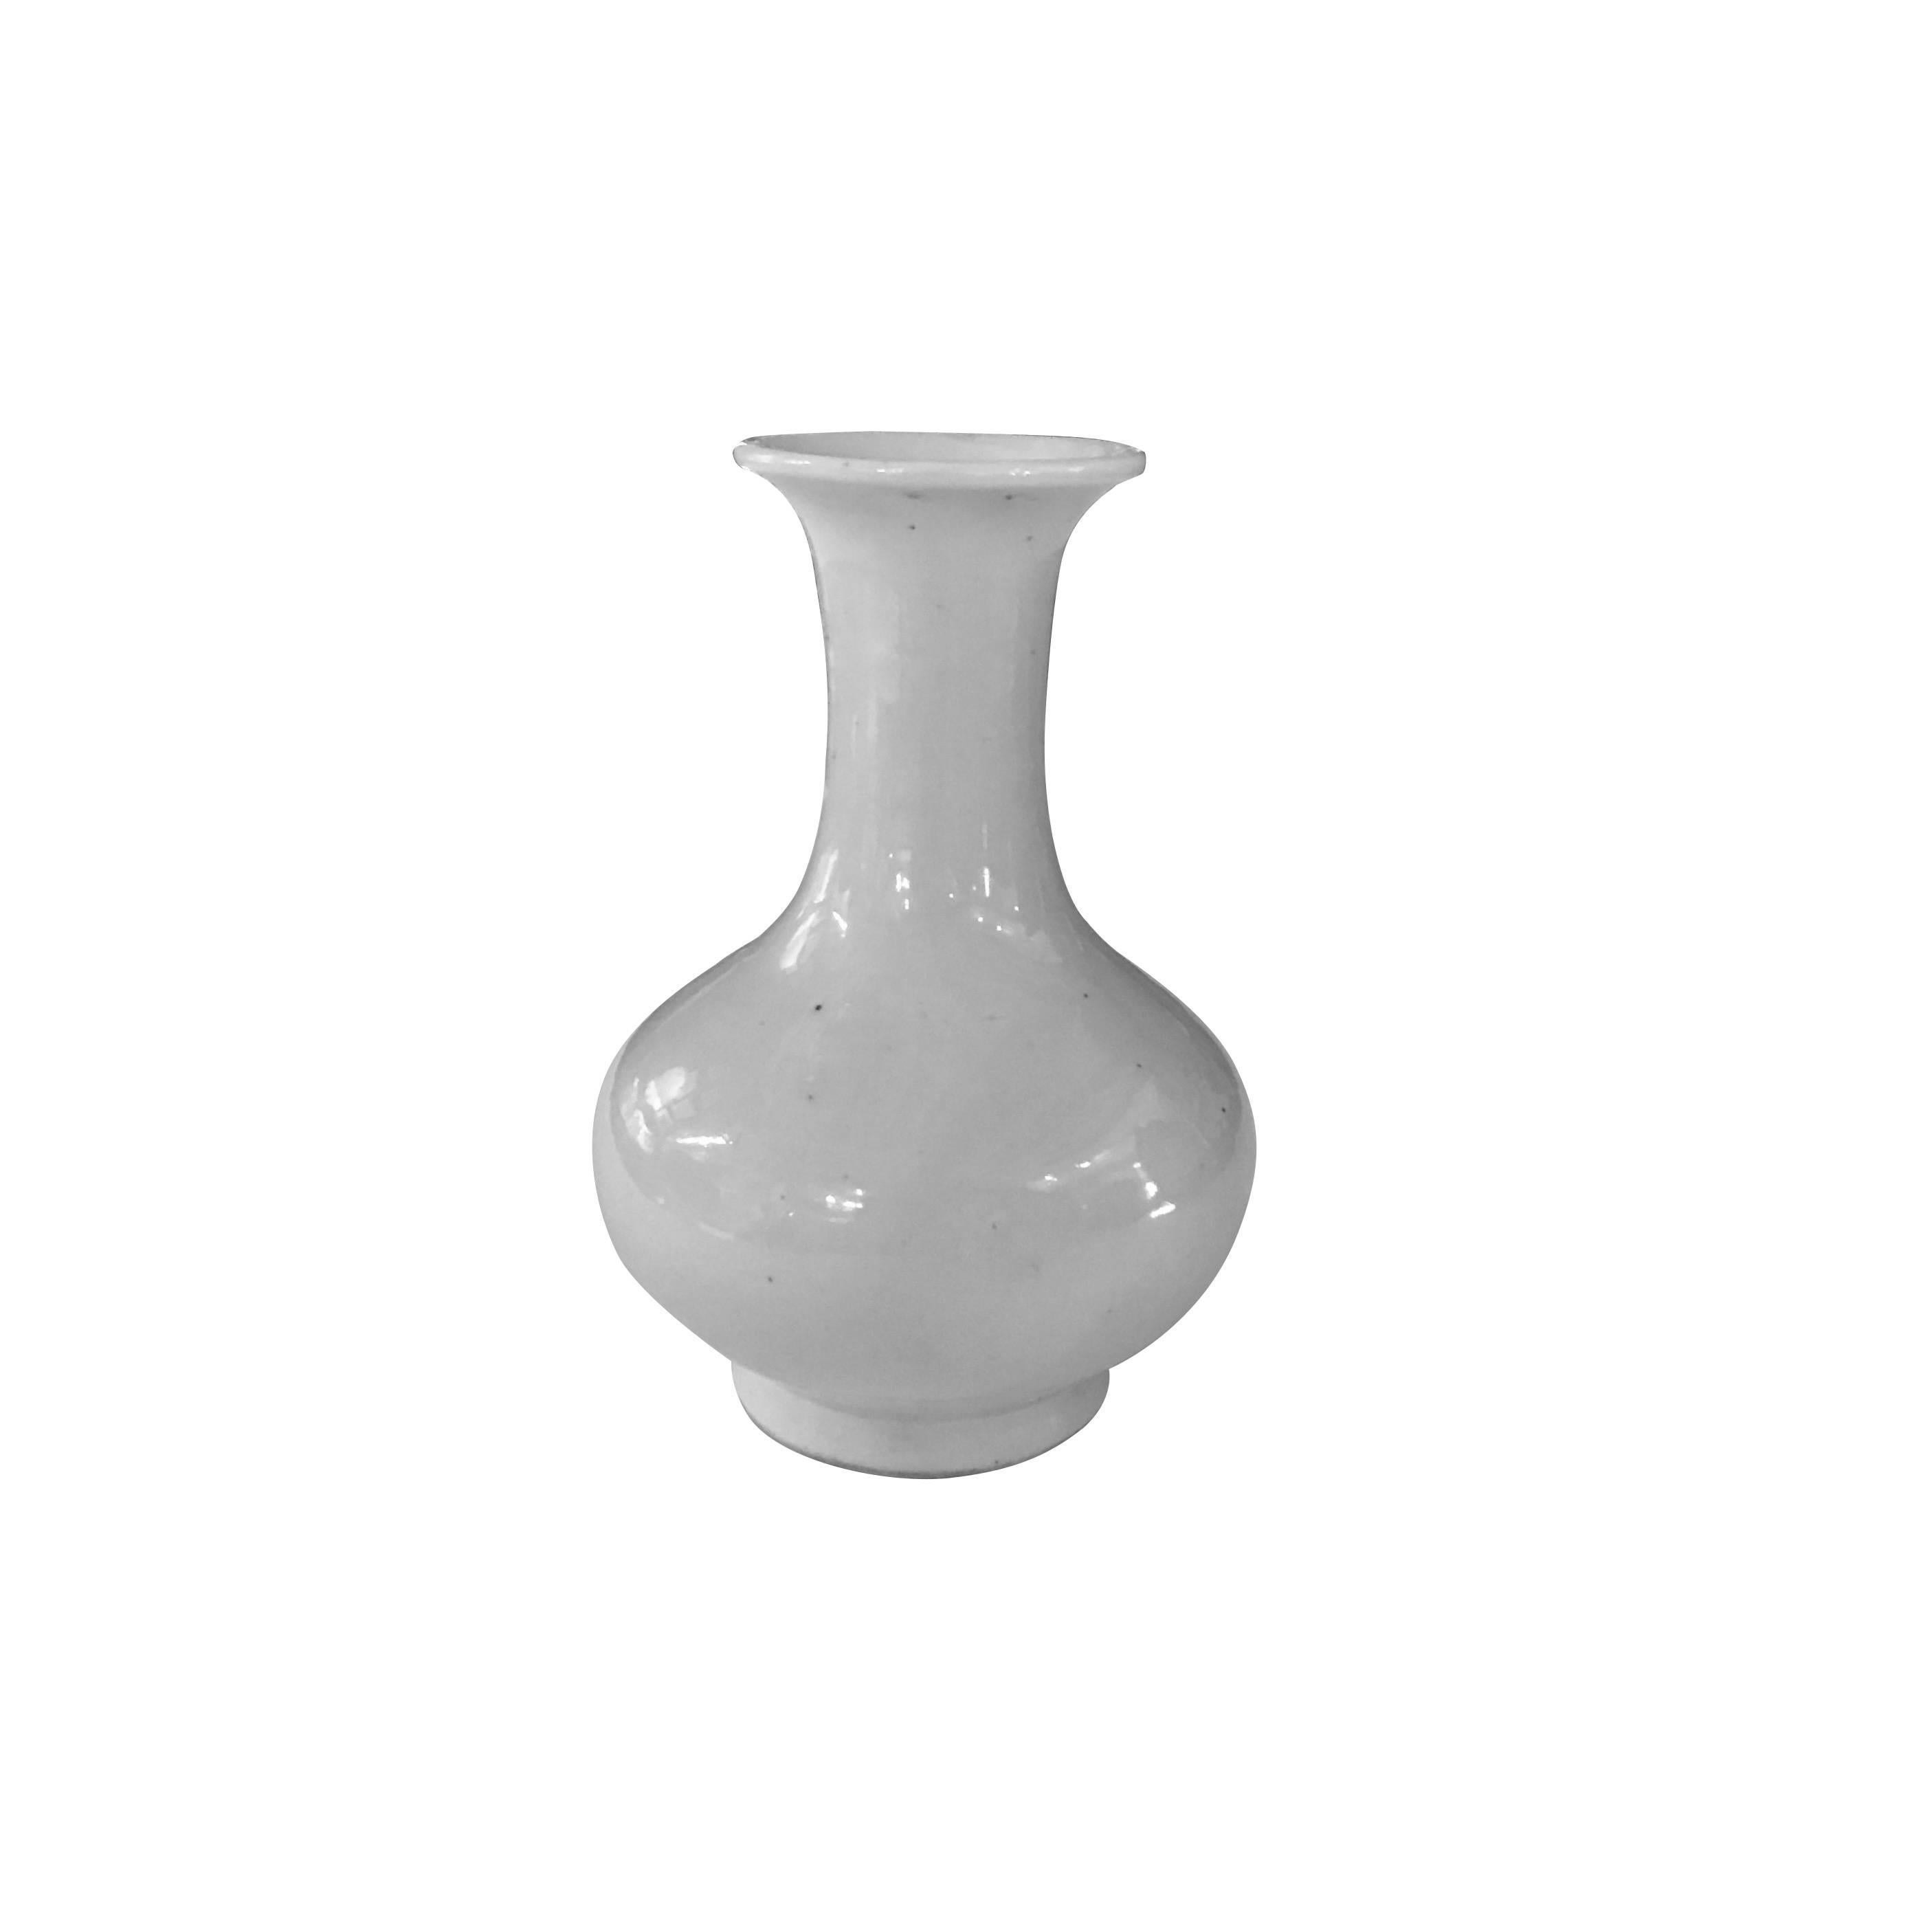 Contemporary Chinese handmade collection of pure white glazed ceramic vases in medium, large and extra large sizes.
Great collection for many decorative end uses.
Beautiful pure white color in simple shapes.
Measure: Medium 4